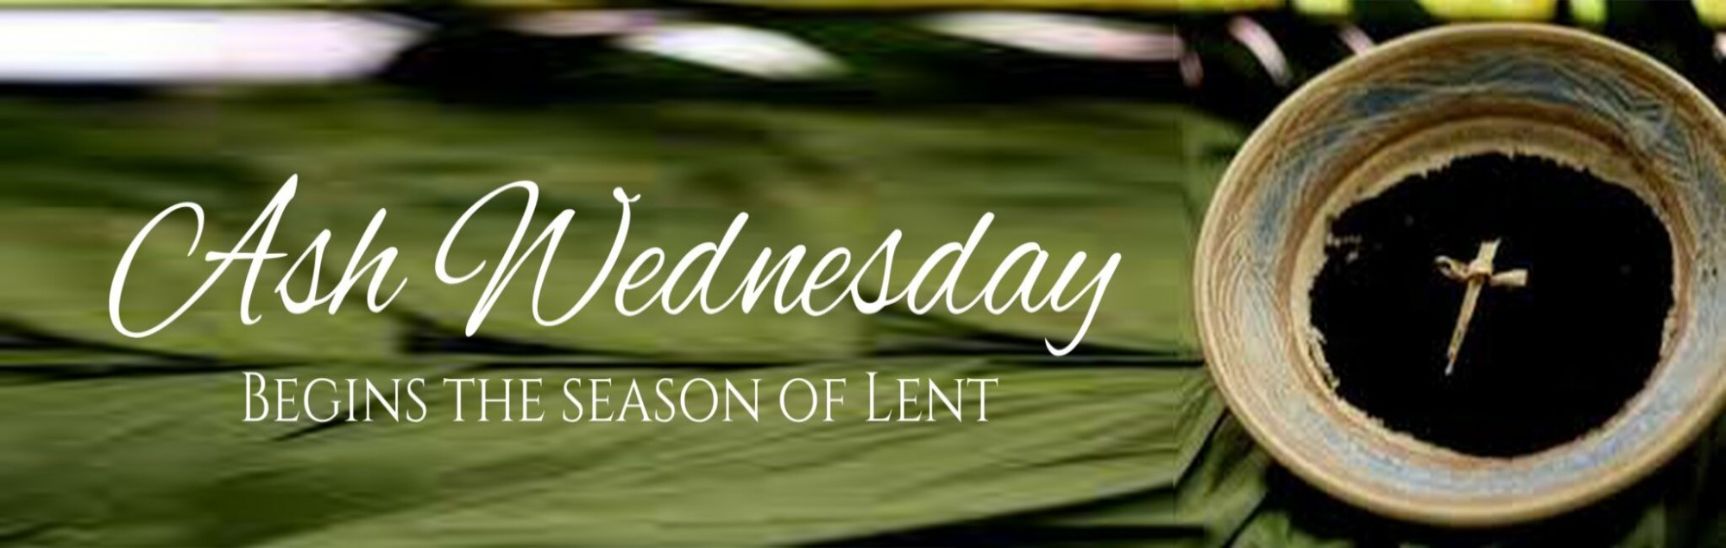 Ash Wednesday Soup Supper & Service   -   Wednesday, February 22 at 5:30pm